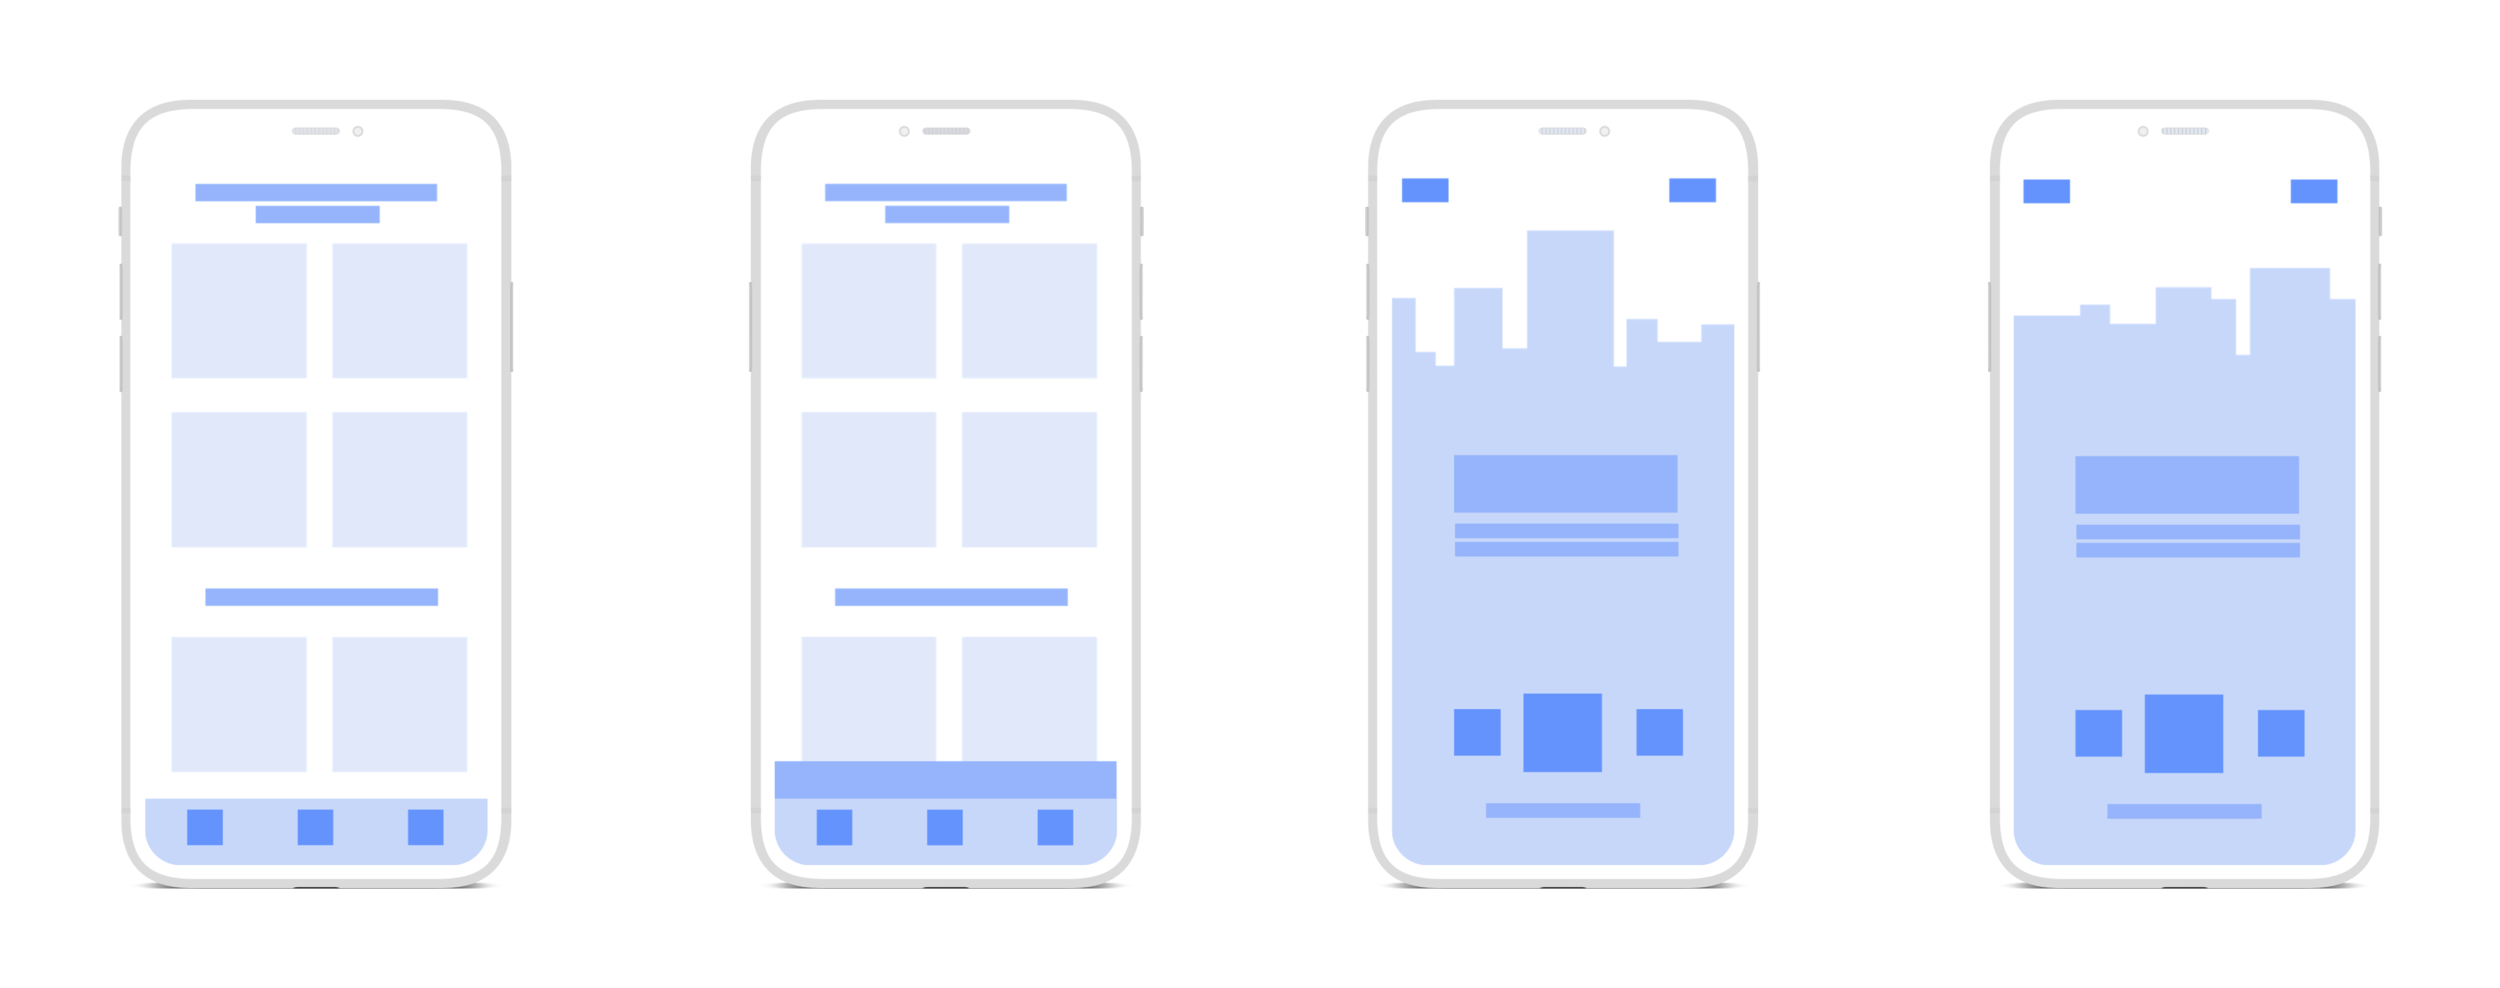 Listening Wireframes.png